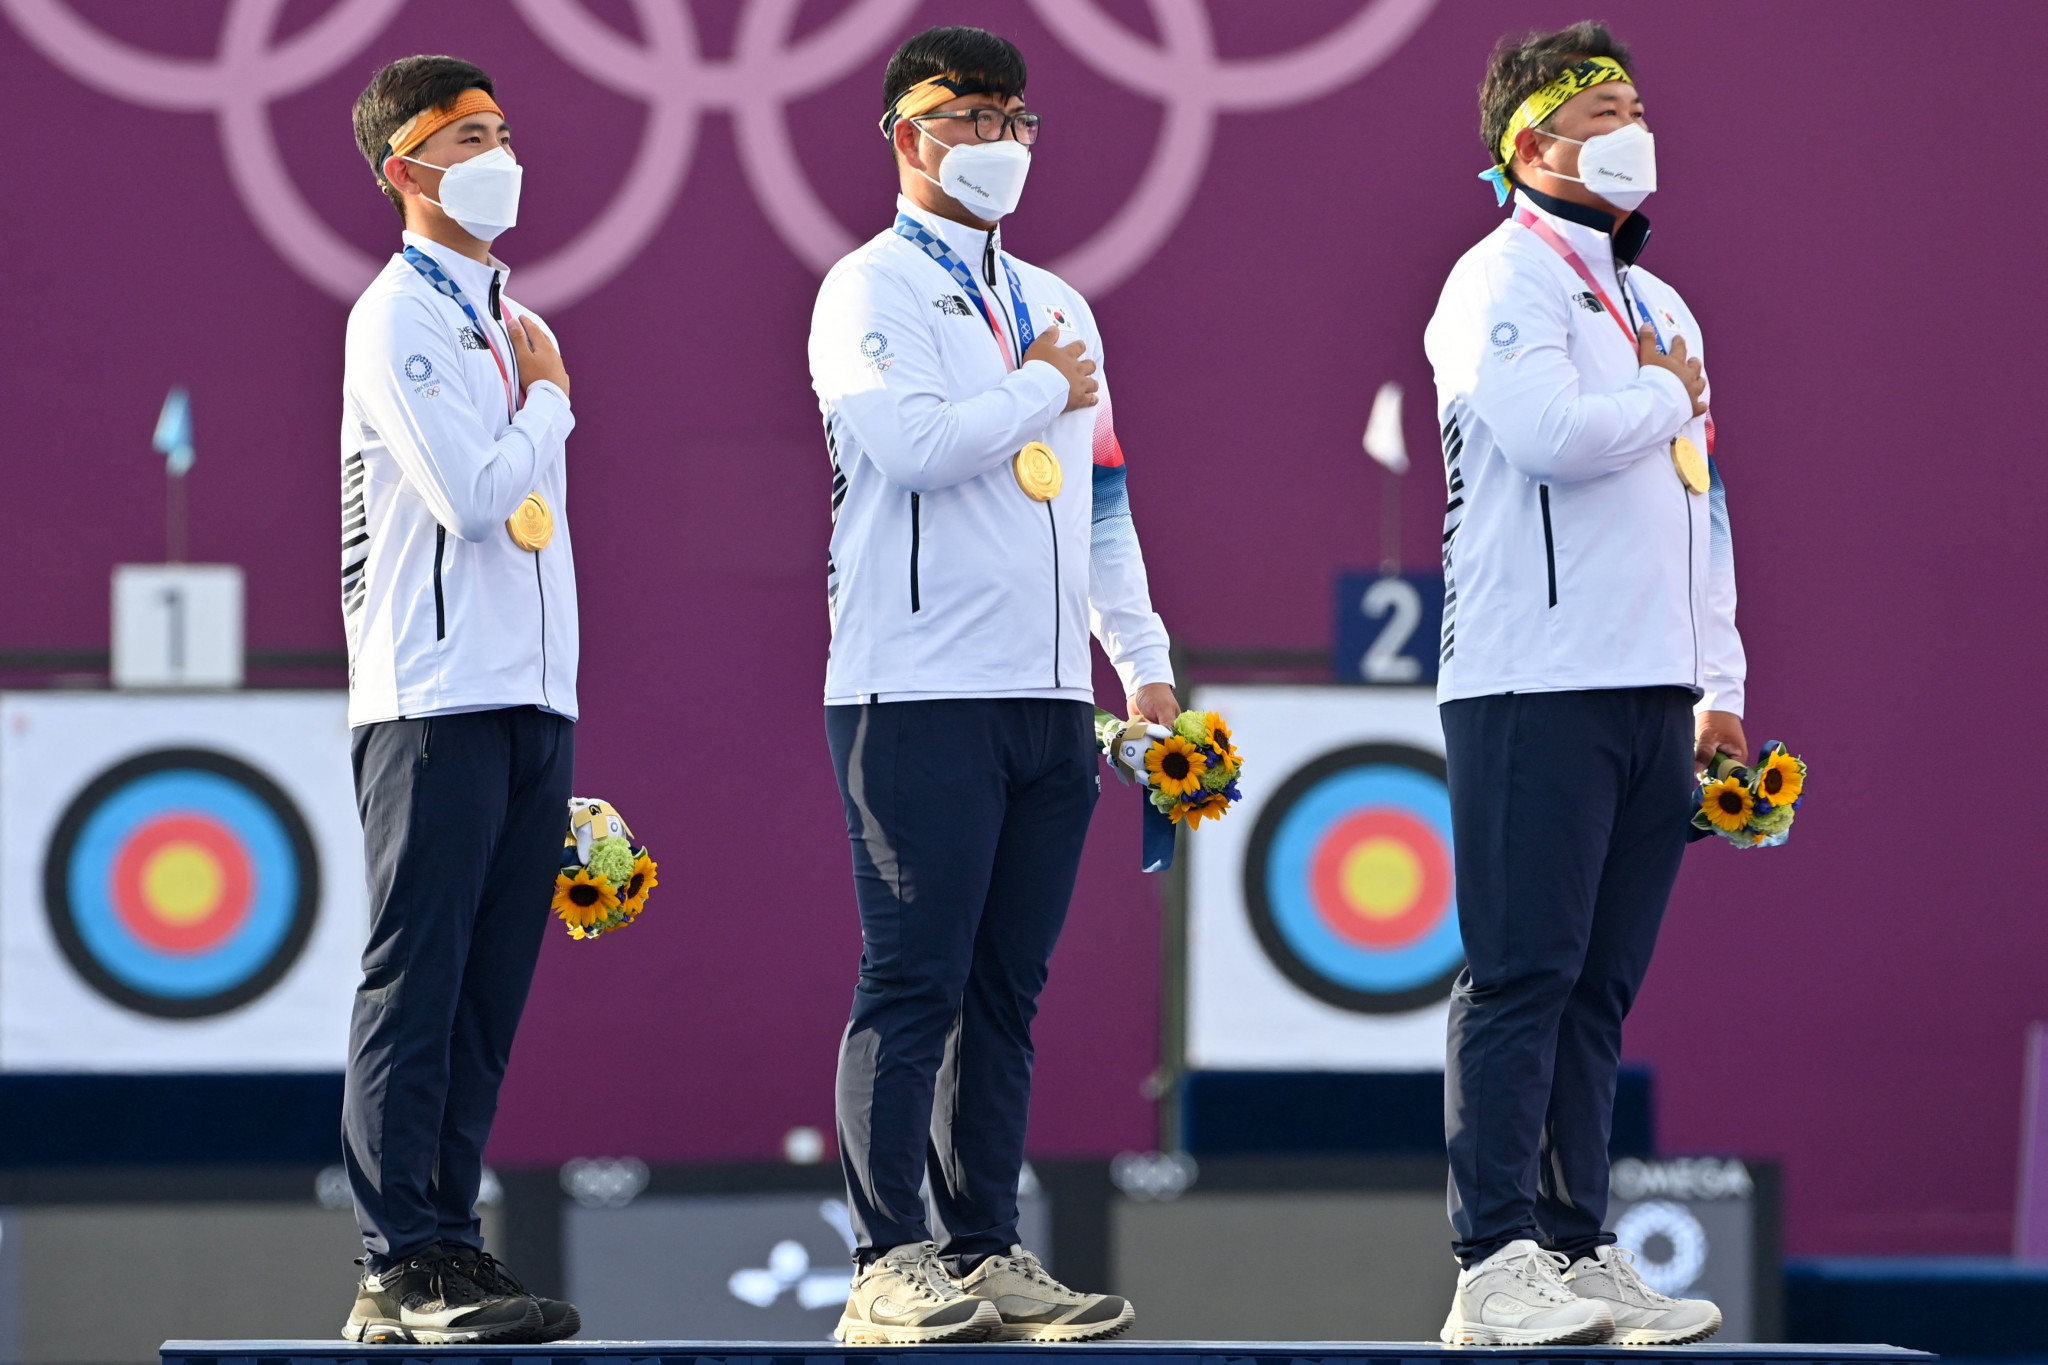 Kim Je-deok, Kim Woo-jin and Oh Jin-hyek steered South Korea to men's team success at Tokyo 2020 ©Getty Images